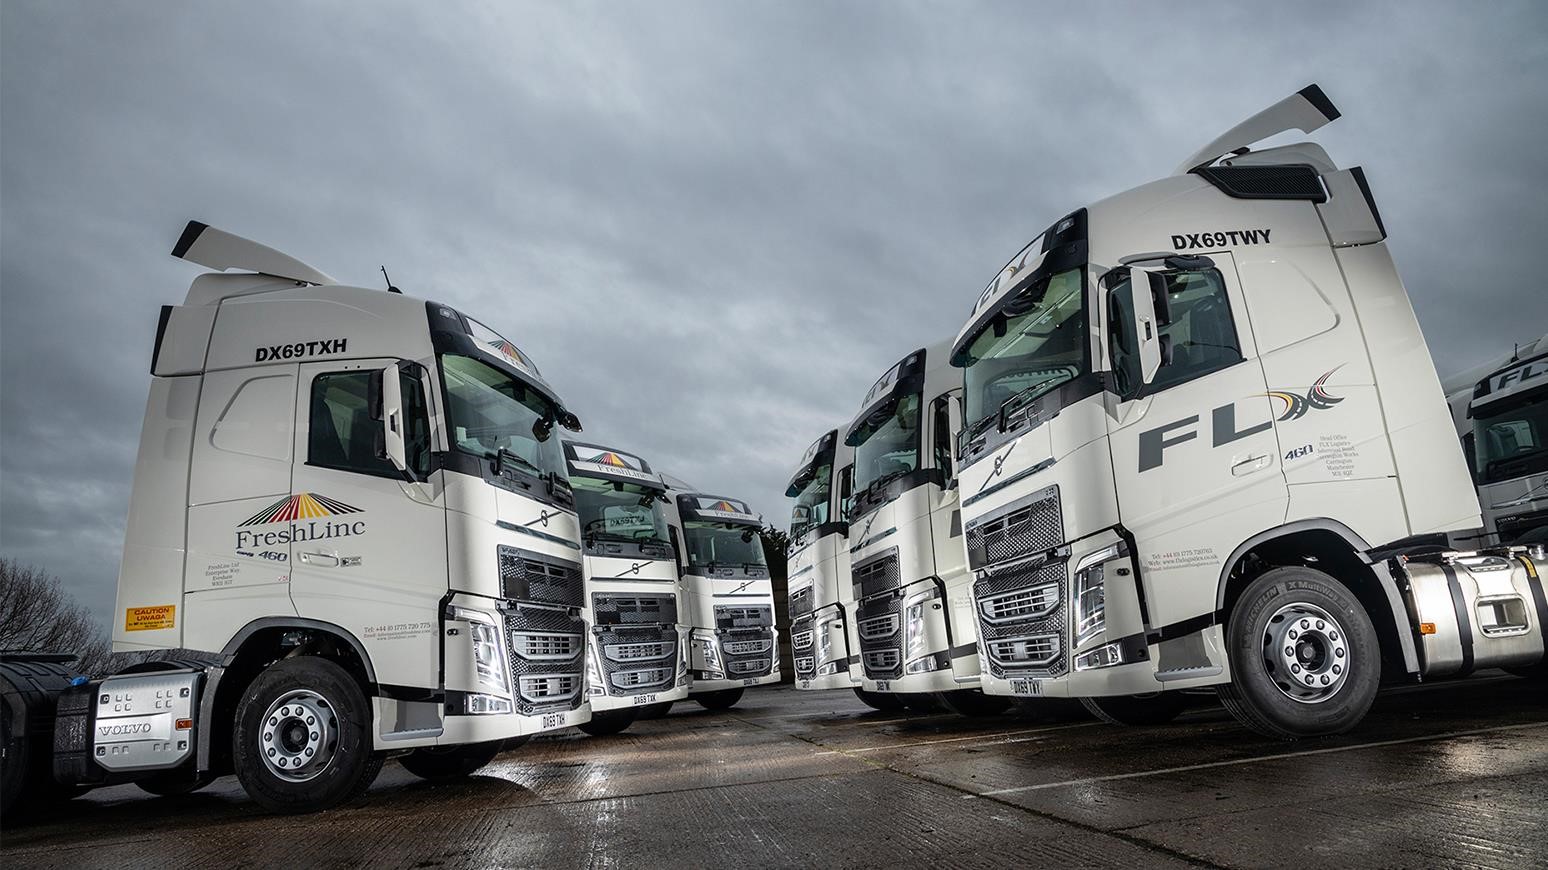 Lincolnshire-Based FreshLinc Group Adds 20 New Volvo FH Trucks For General Haulage & Temperature-Controlled Operations